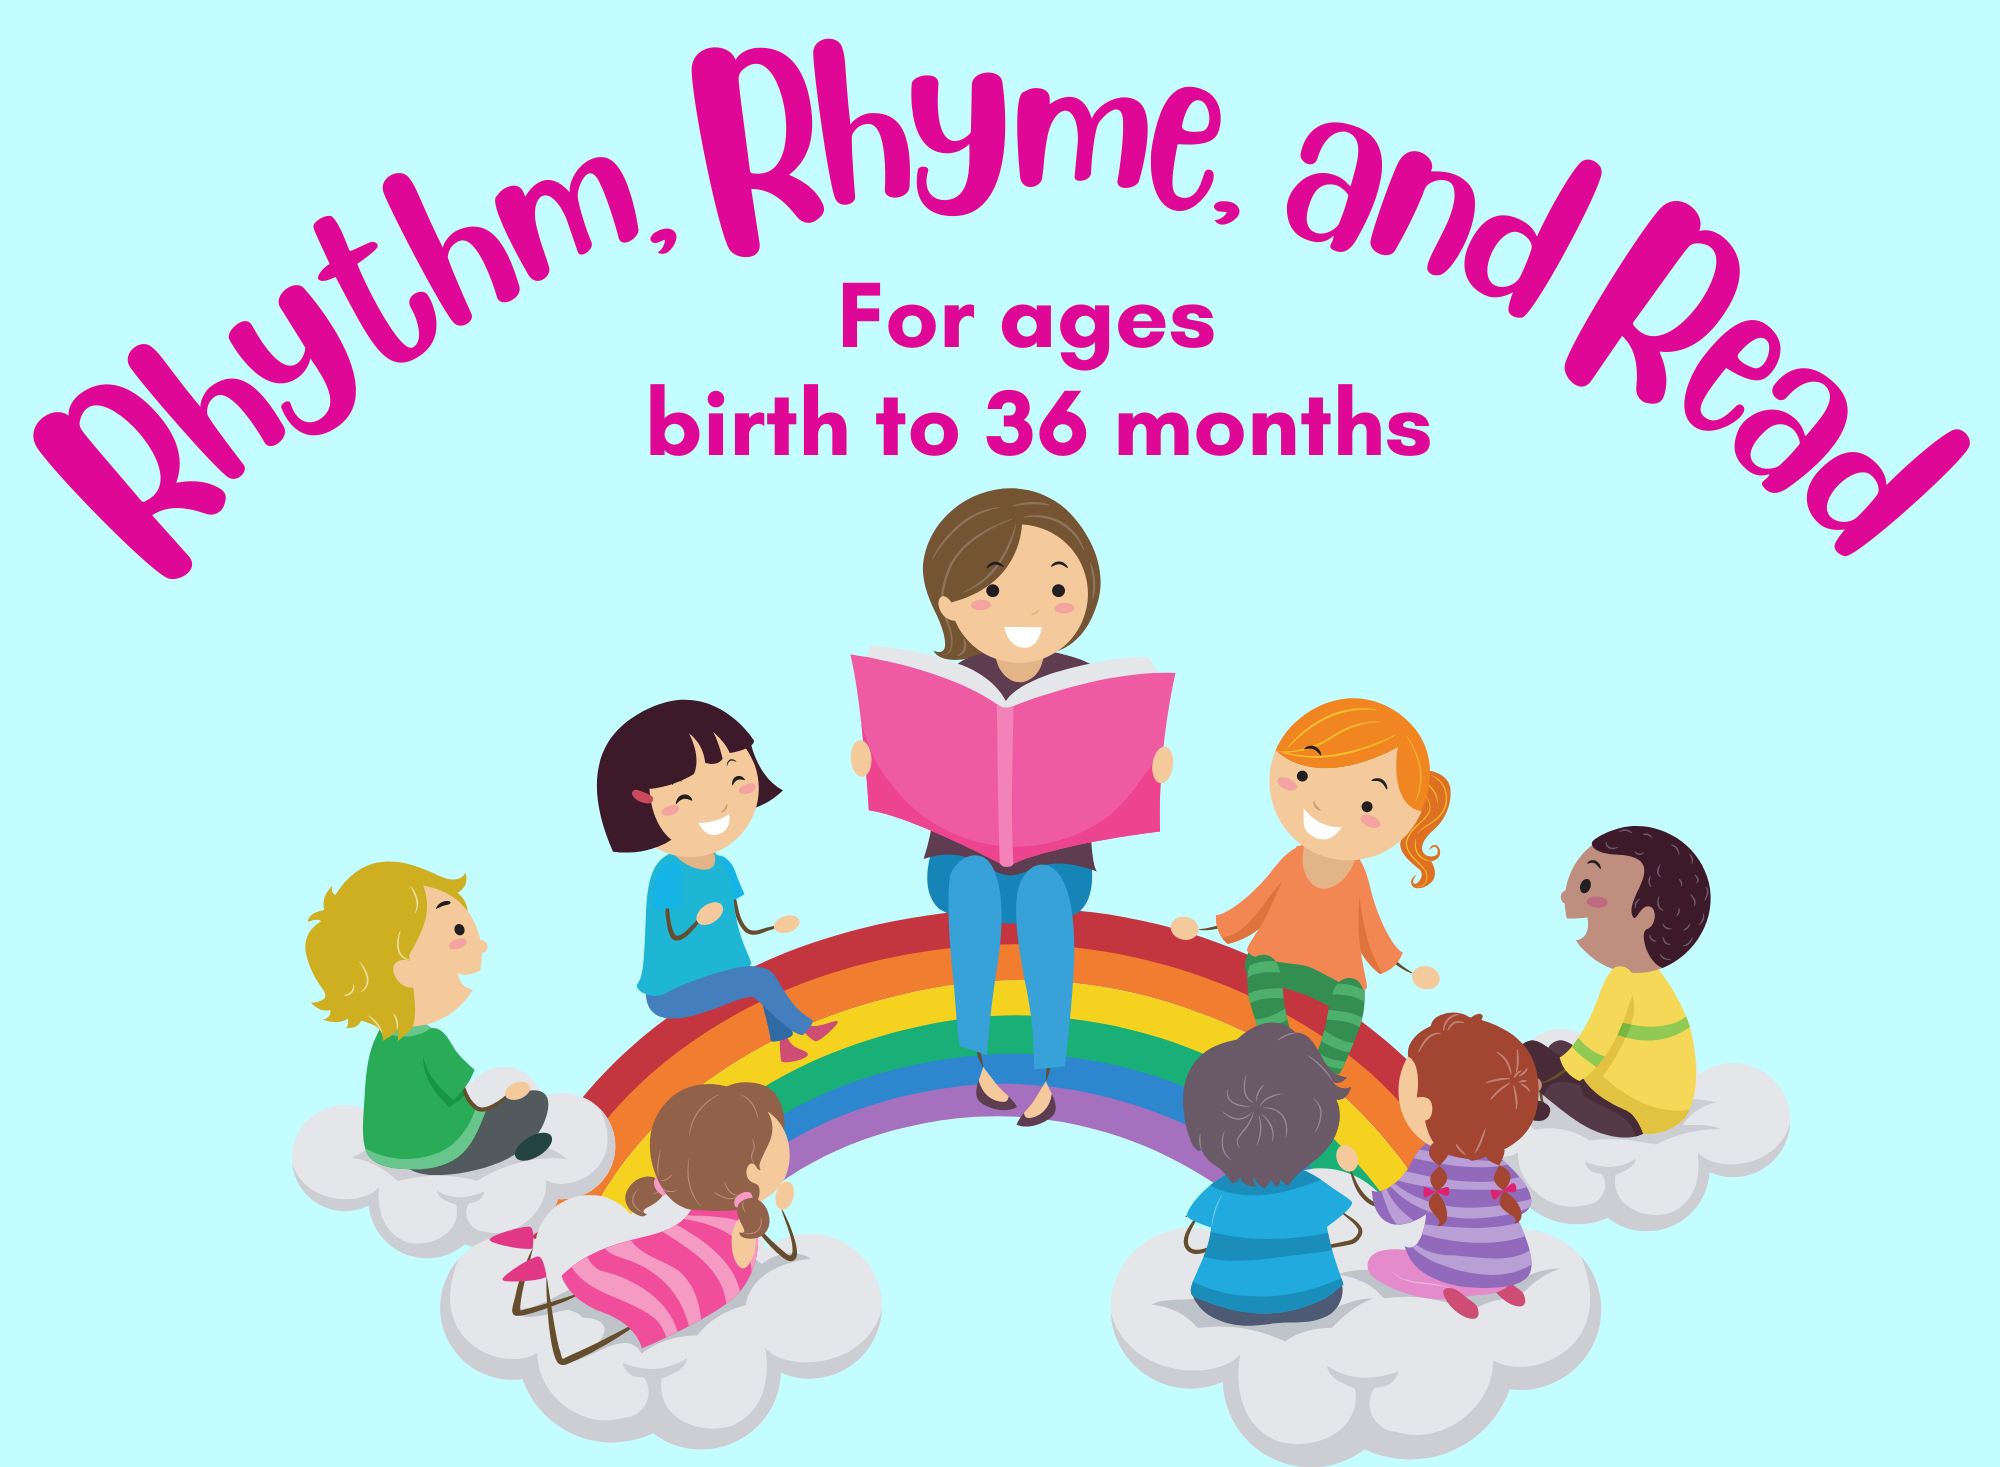 light blue background, pink letters say rhythm, rhyme and read for ages birth to 36 months. image in the center is a female adult reading to a circle of 7 kids sitting on clouds and rainbow